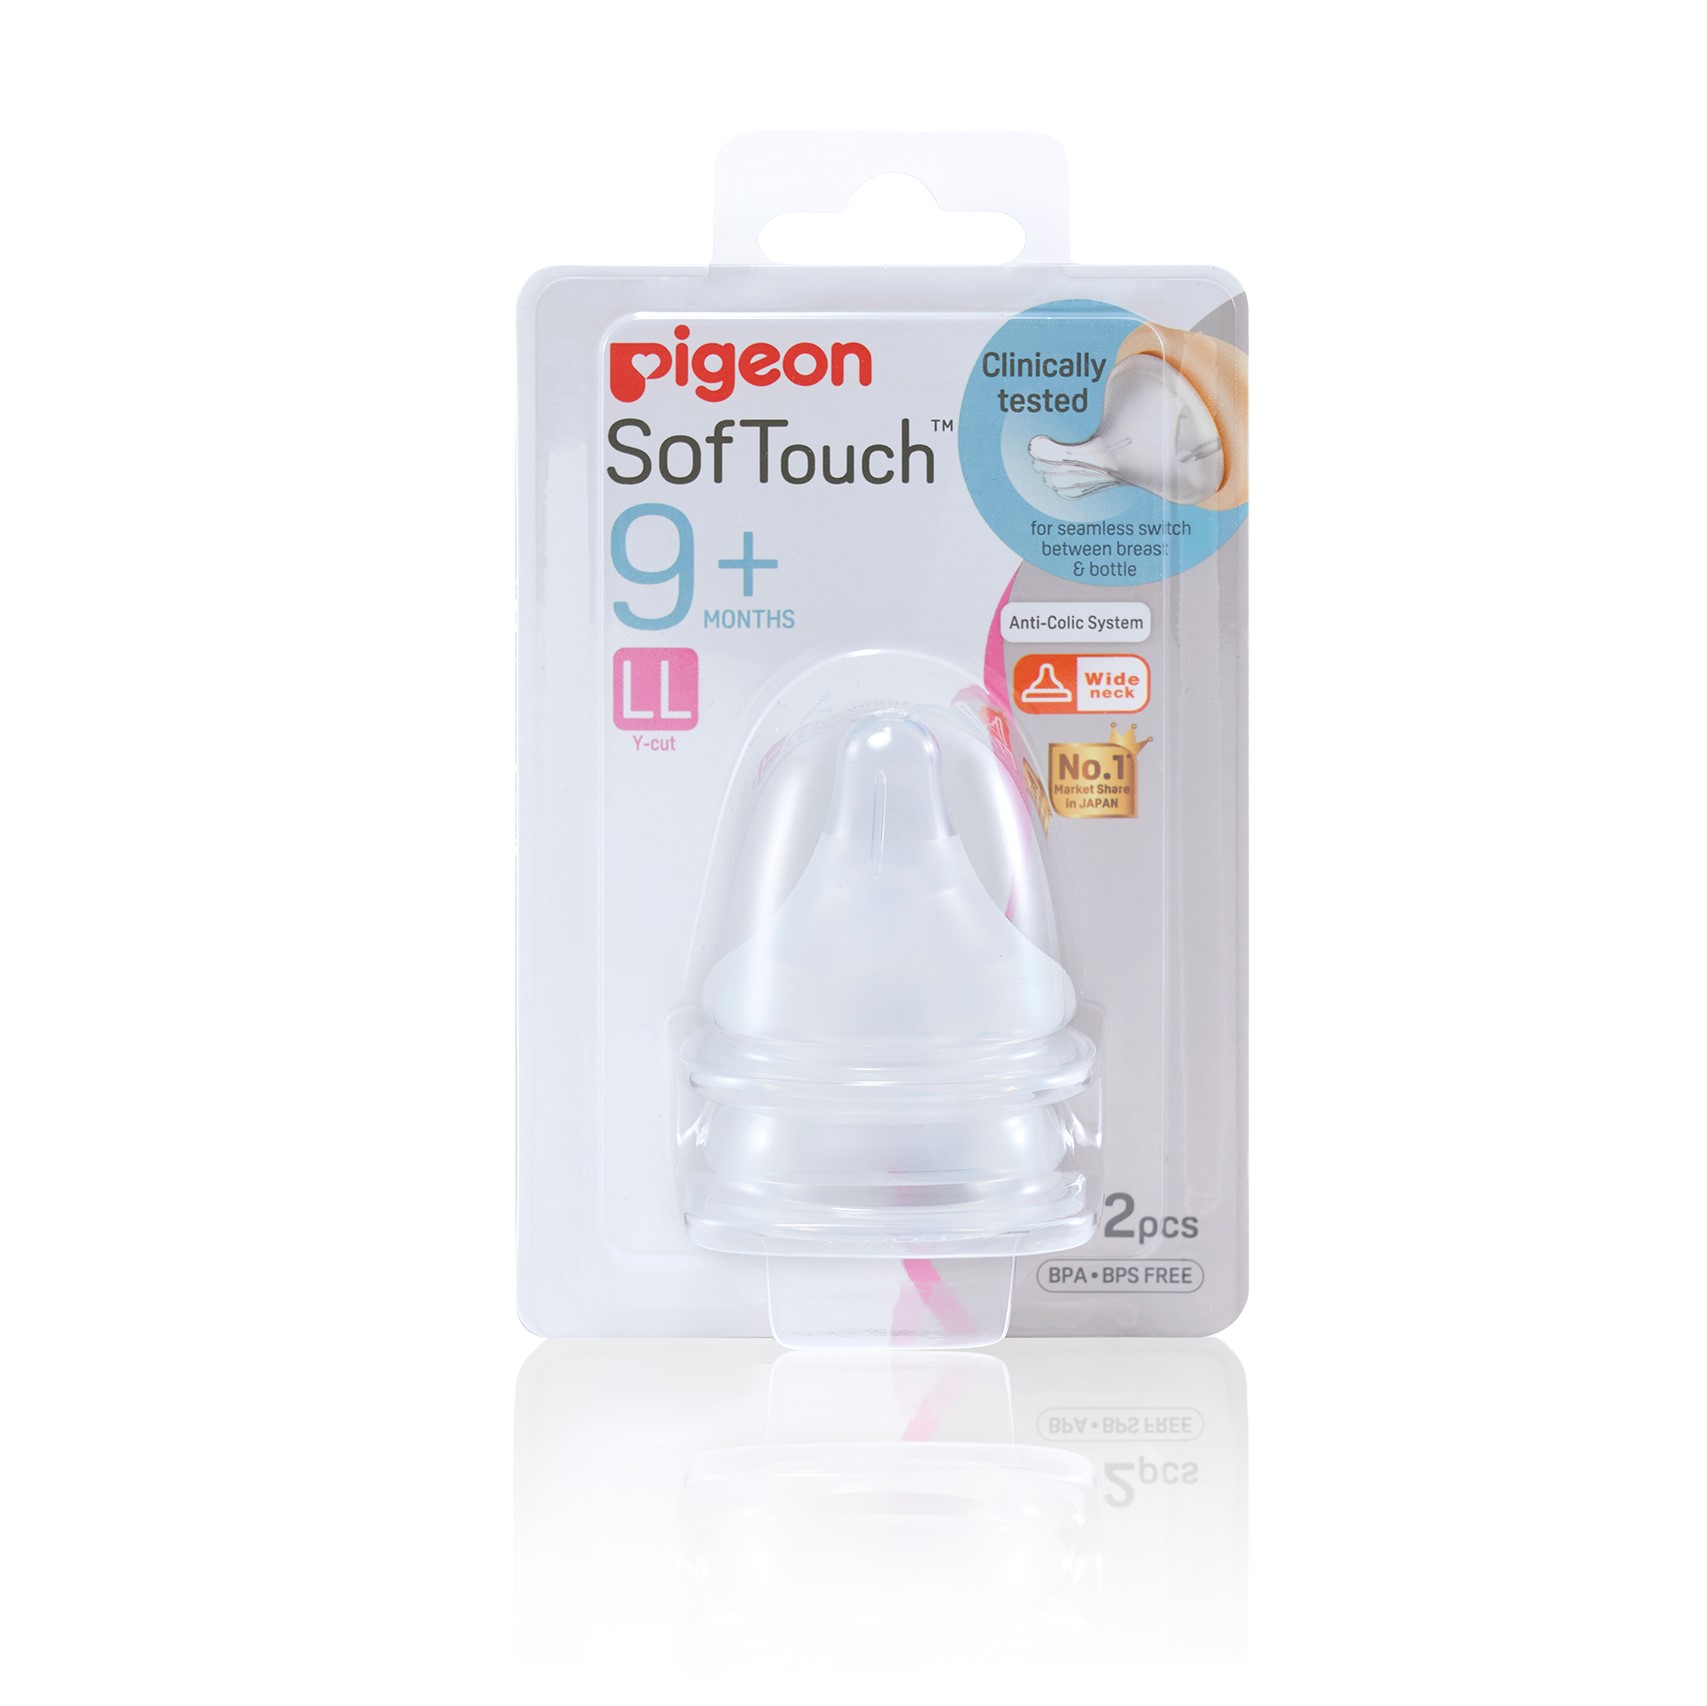 baby-fair Pigeon SofTouch Nipple Blister Pack 2Pcs (LL) (PG-78482)